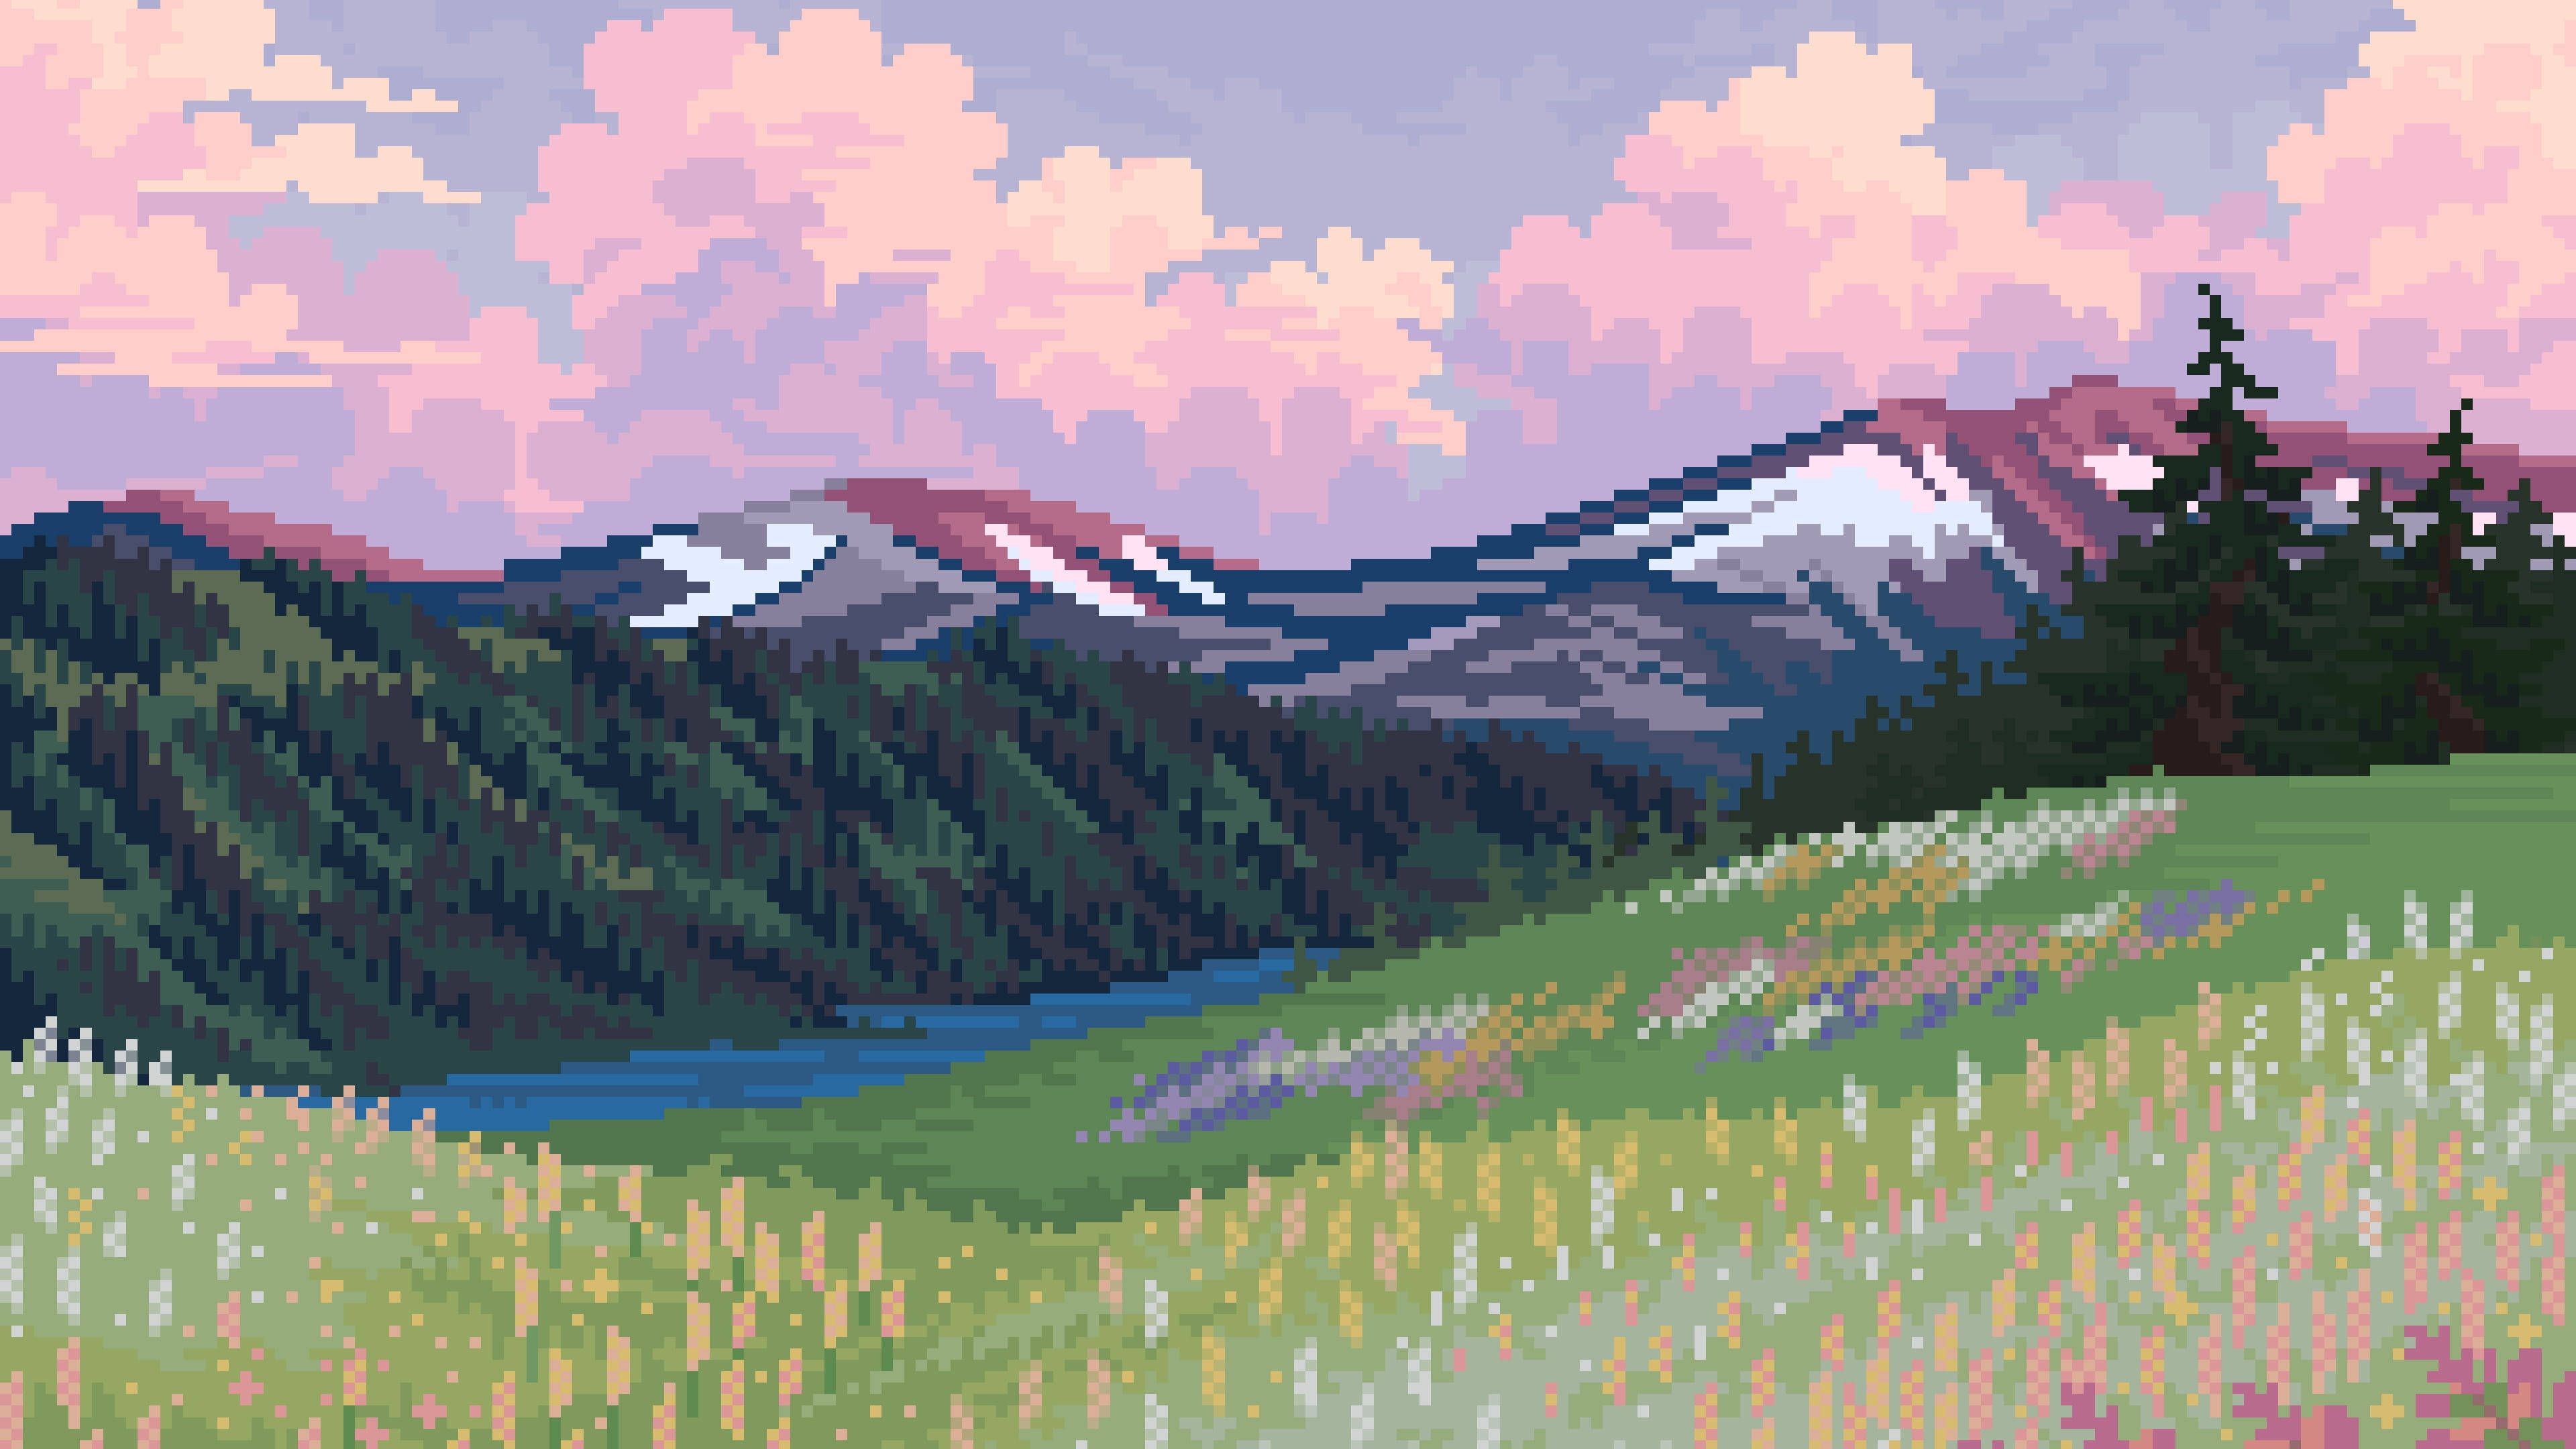 A pixel art image of a mountain range with a meadow in the foreground - Pixel art